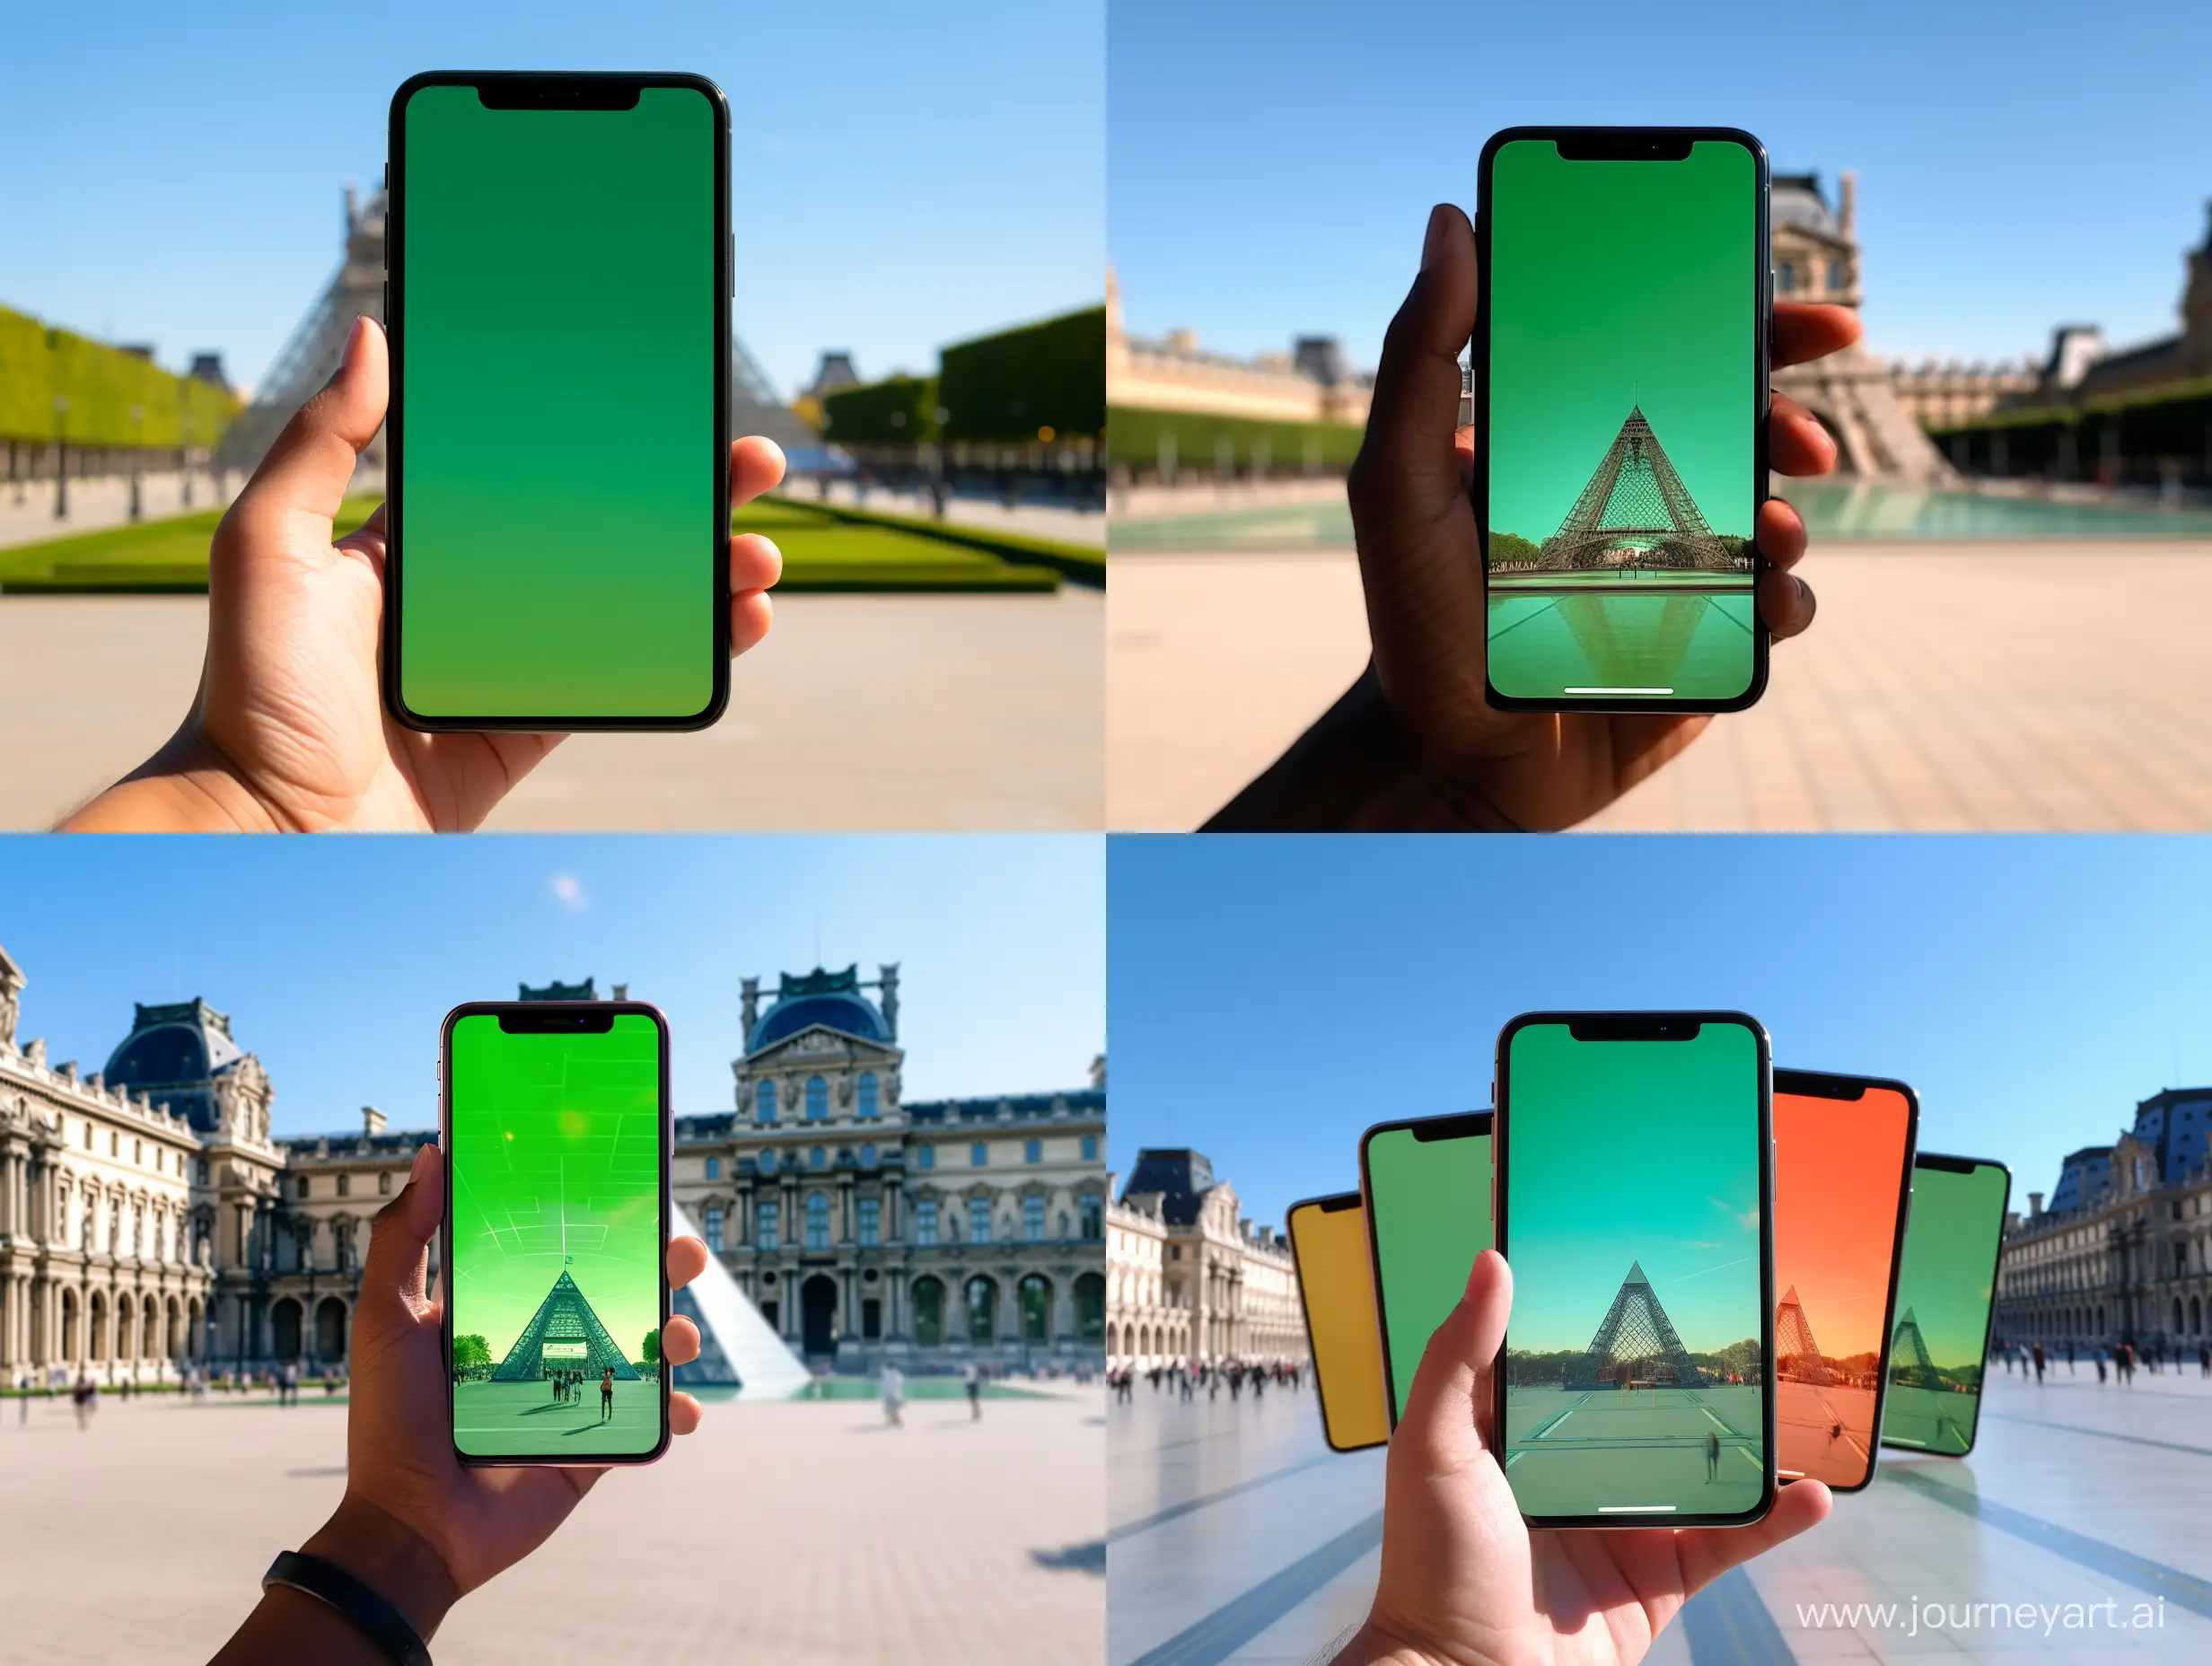 Louvre-Museum-Entrance-and-iPhone-15-Green-Screen-Display-in-Daylight